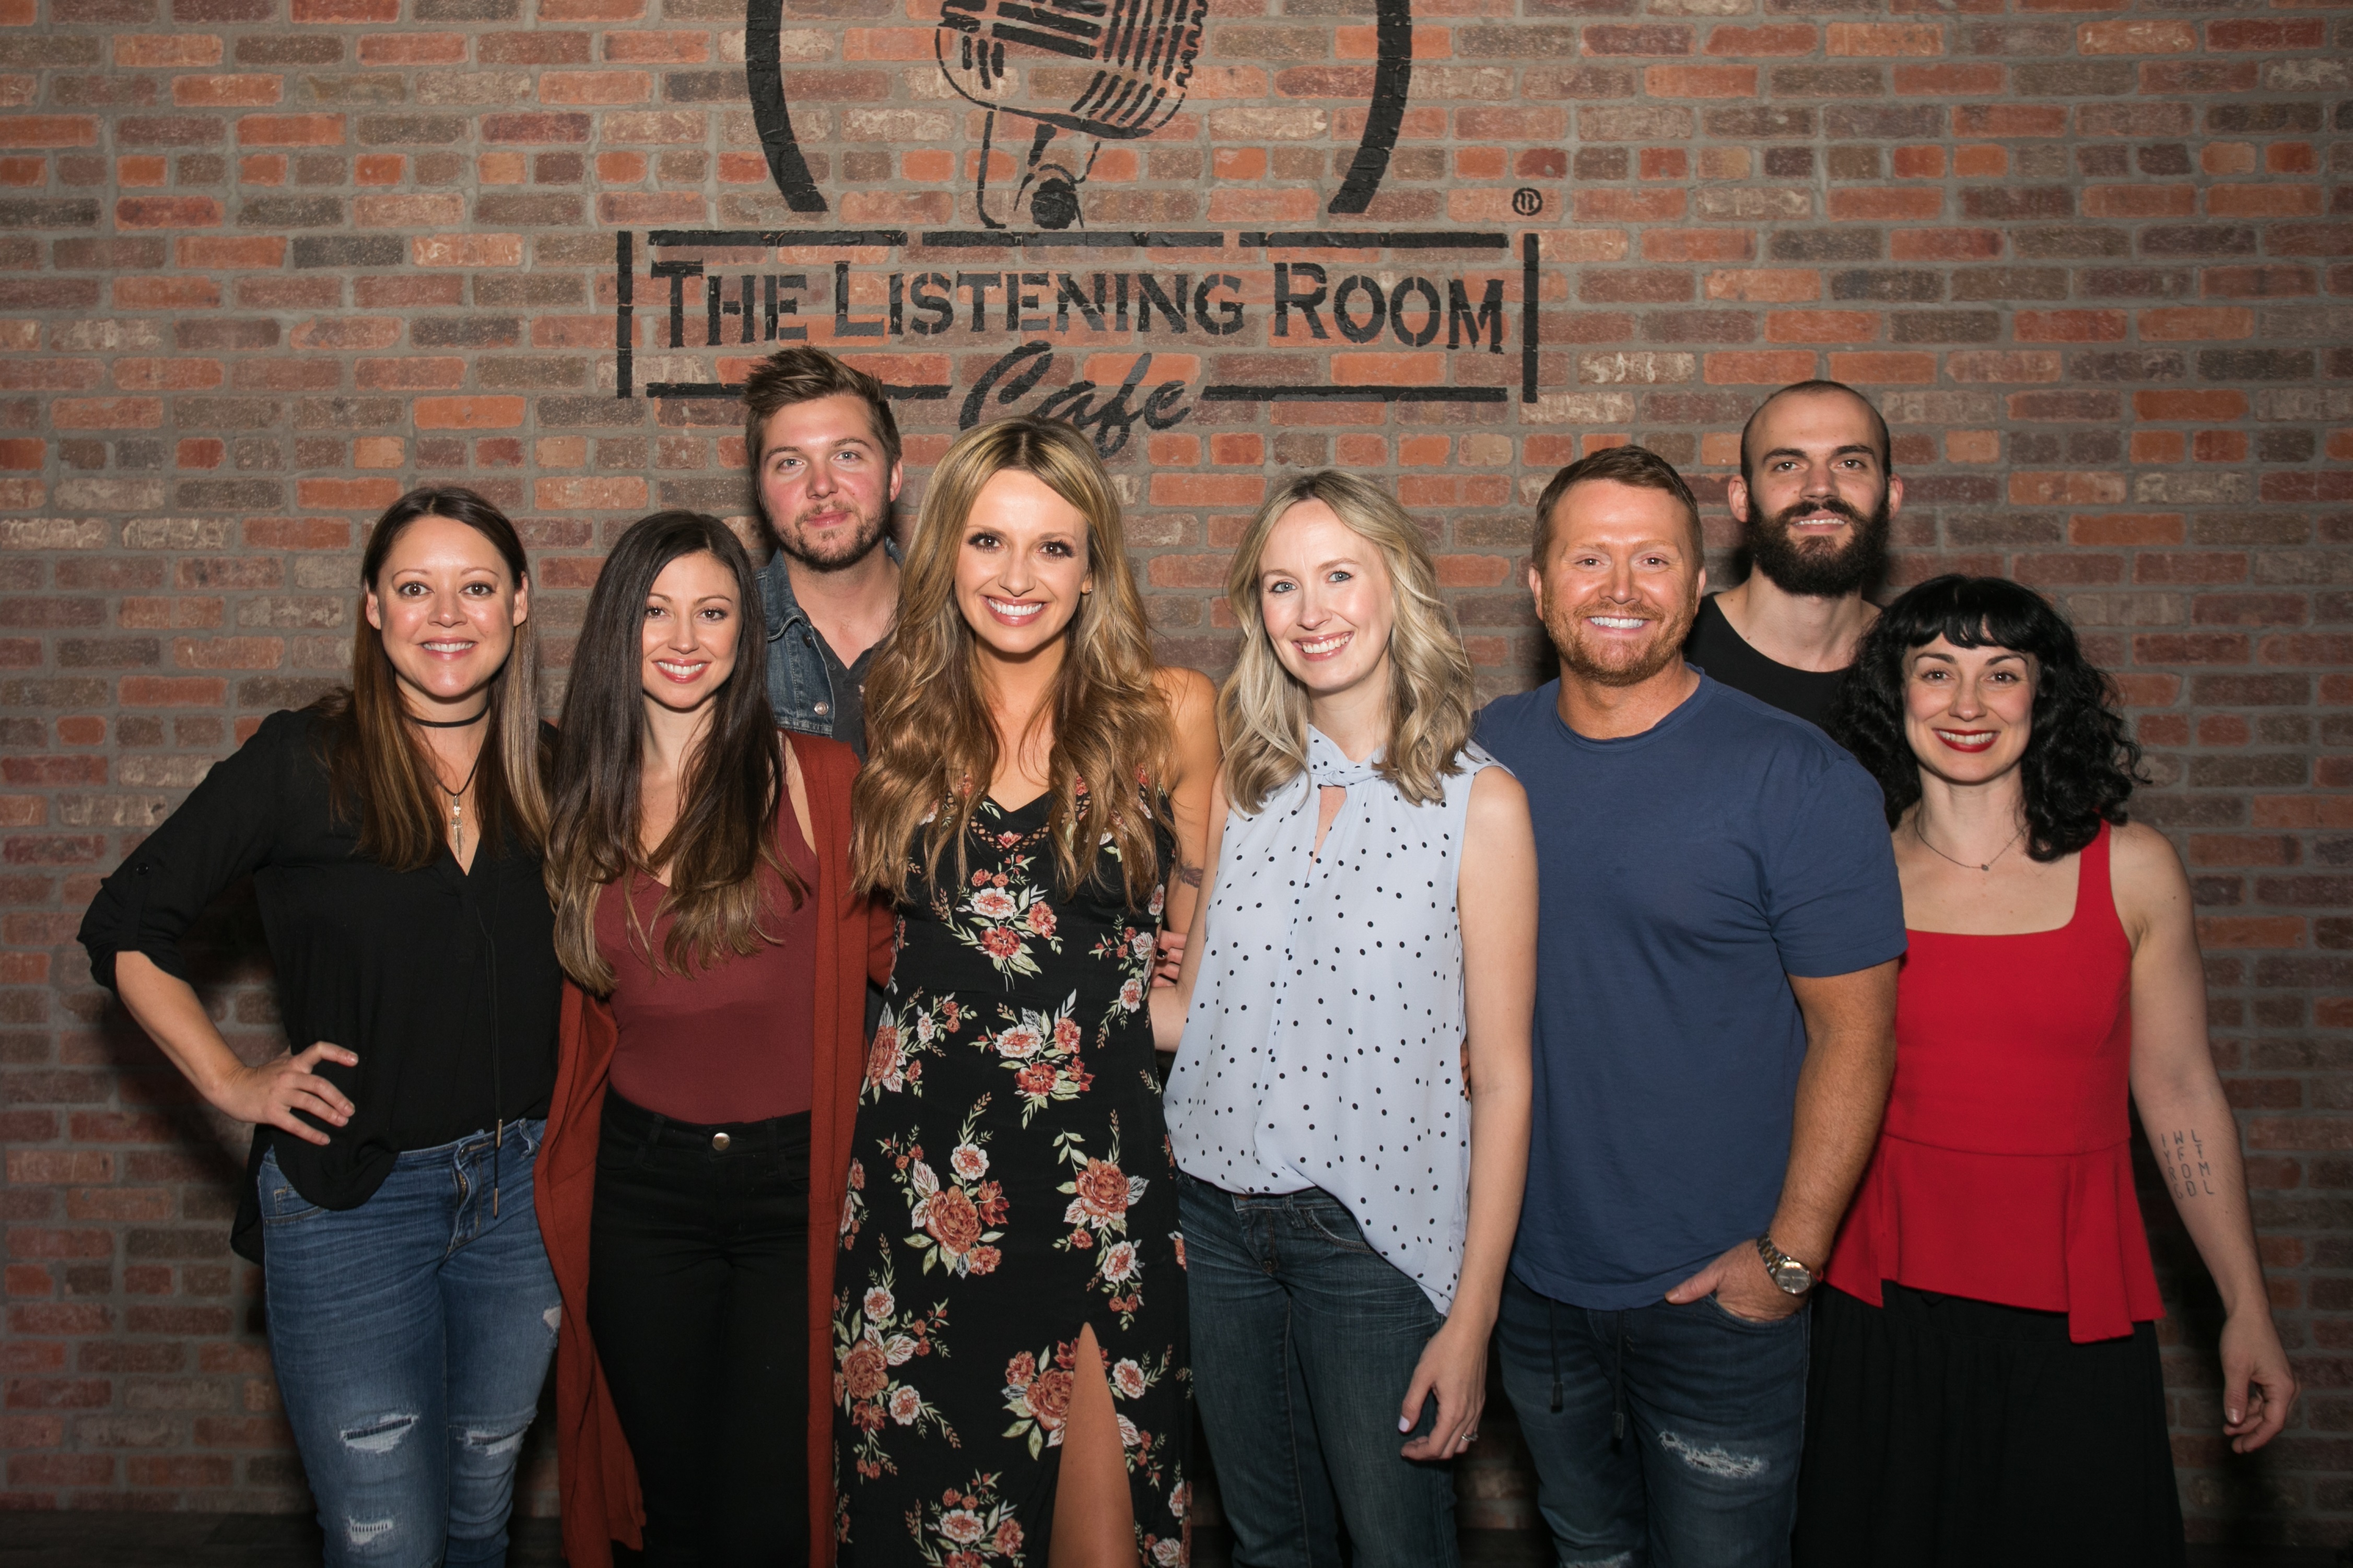 Pictured (L-R): Songwriters Hillary Lindsey and Allison Veltz, Guitarist Shane Smith, Carly Pearce, Songwriters Emily Shackleton and Shane McAnally, Drummer Mike Blong and Songwriter Laura Veltz; Photo credit: Katie Kauss